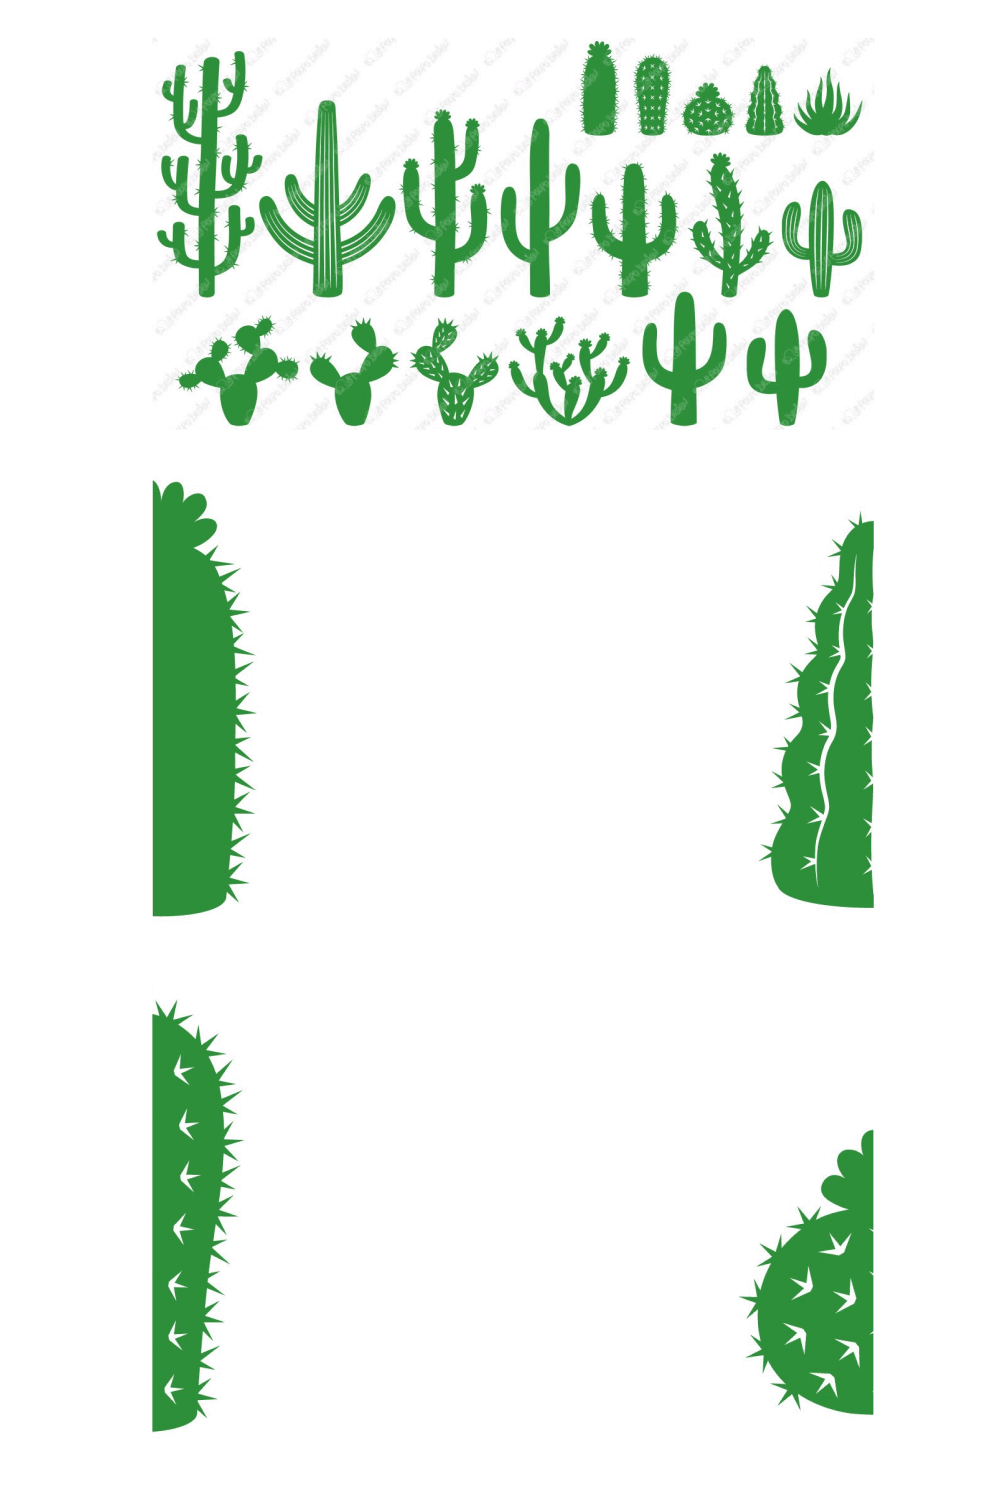 Many Types of Cactuses.